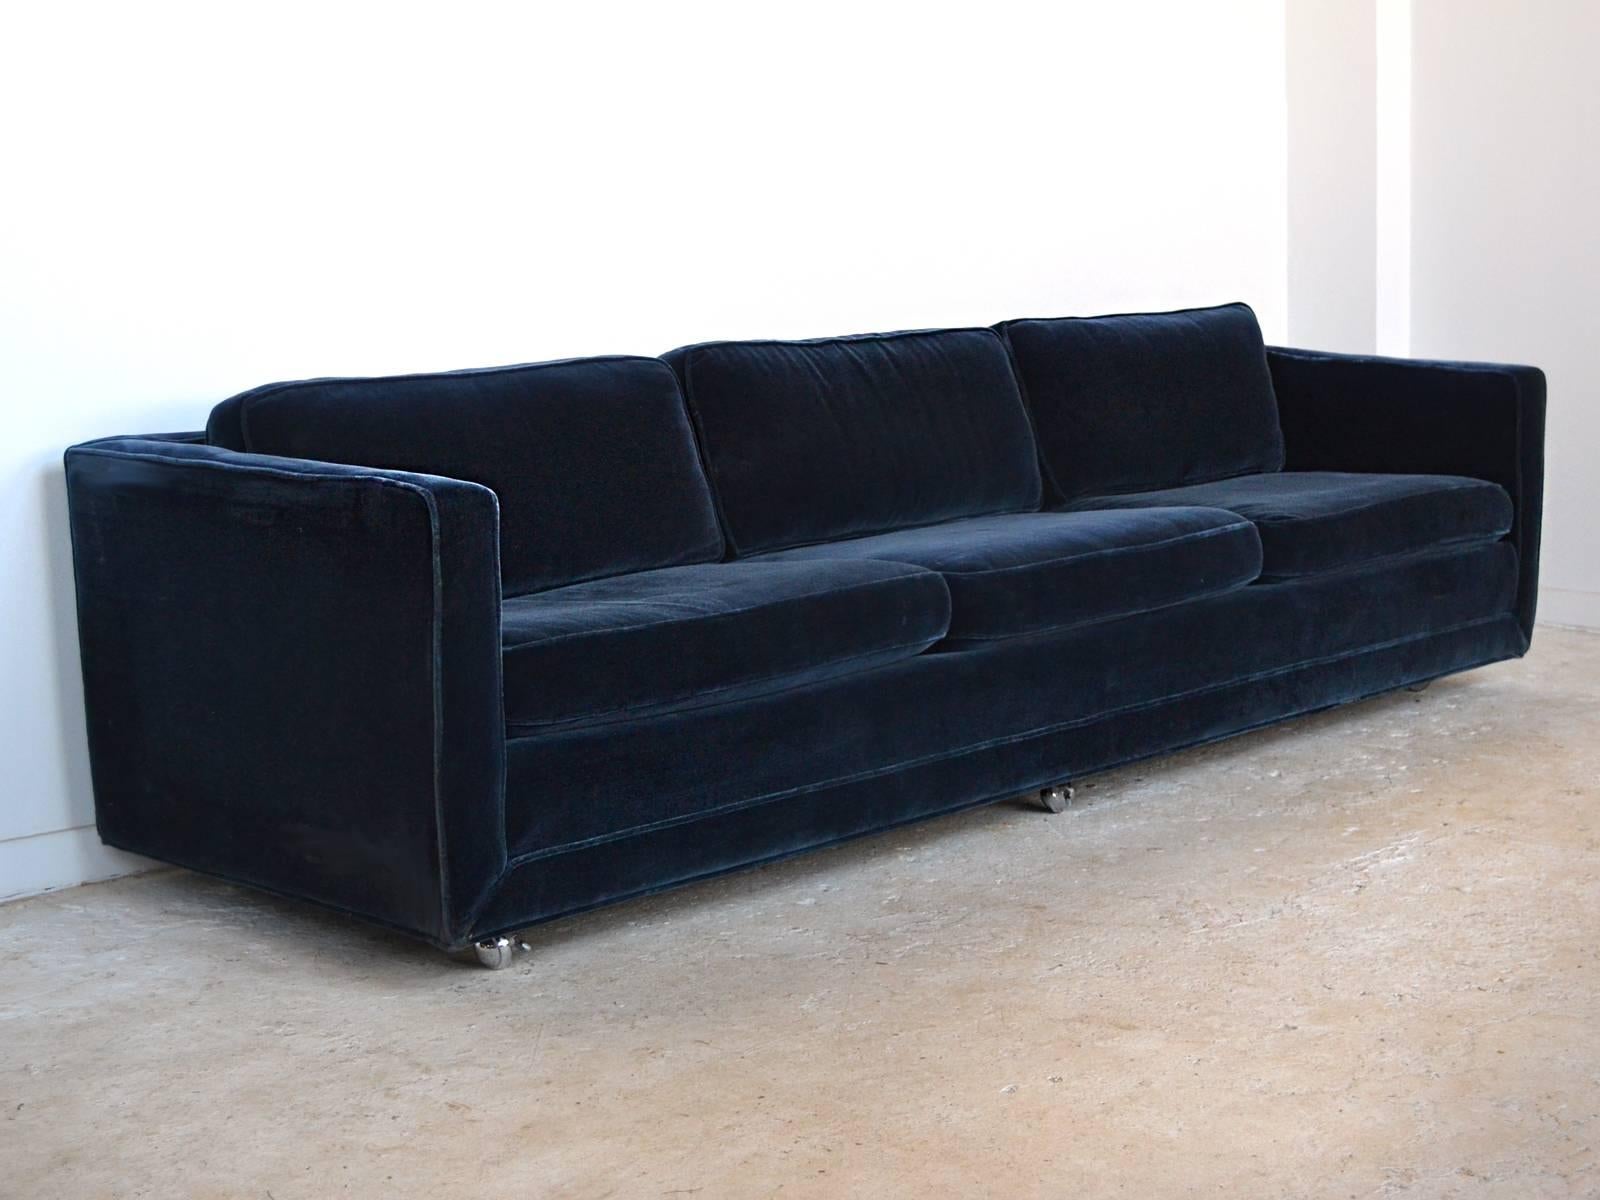 This long, luxurious 9 foot sofa by Ward Bennett is upholstered in rich French ultramarine blue velvet mohair. Perfectly proportioned, it has a sumptuous seat with down-filled back cushions and is supported by chrome caster feet.